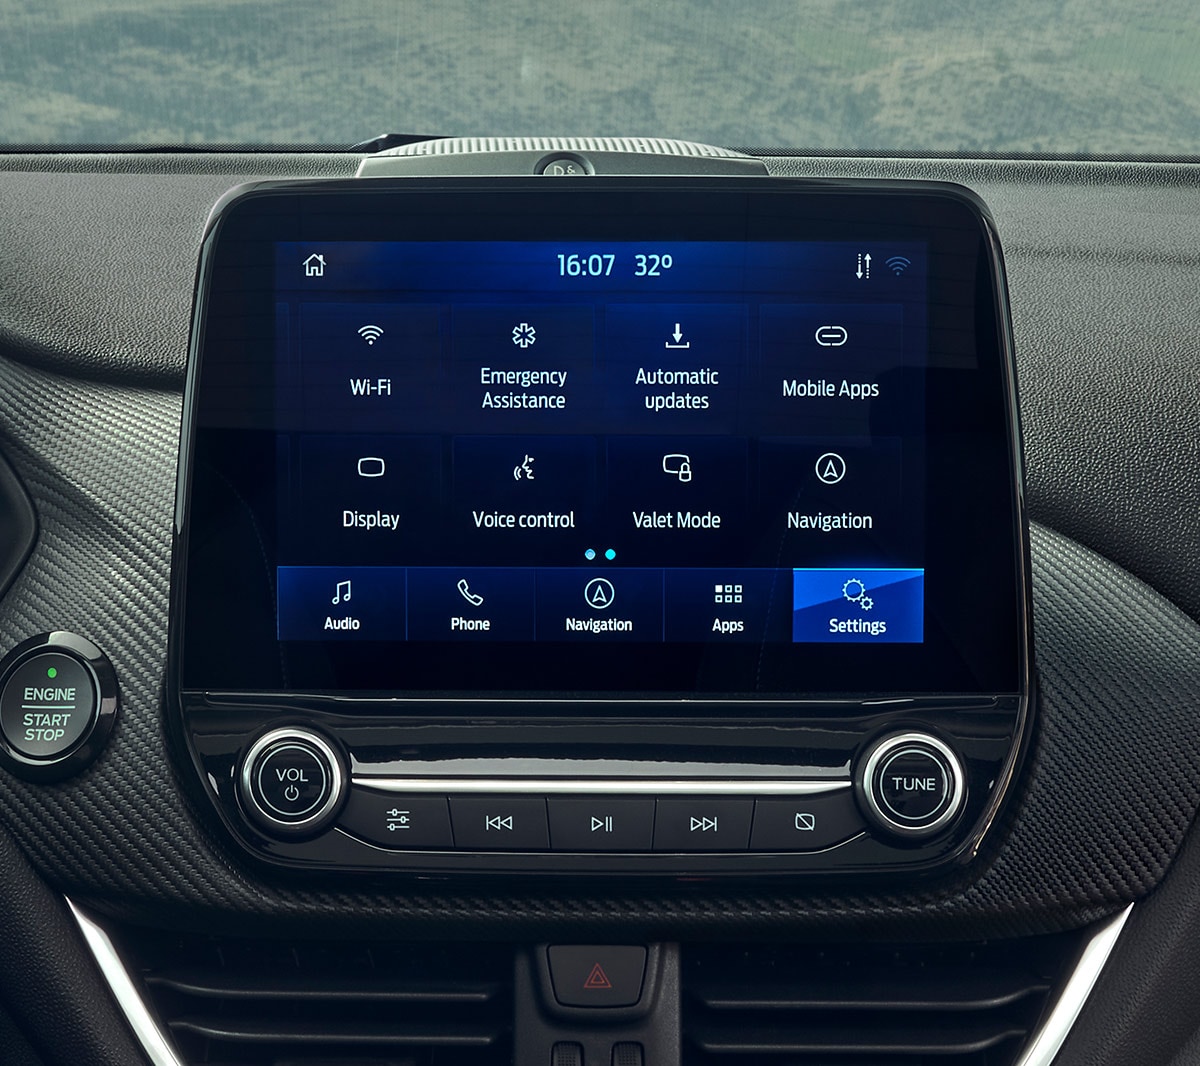 Ford Fiesta interior view of touchscreen